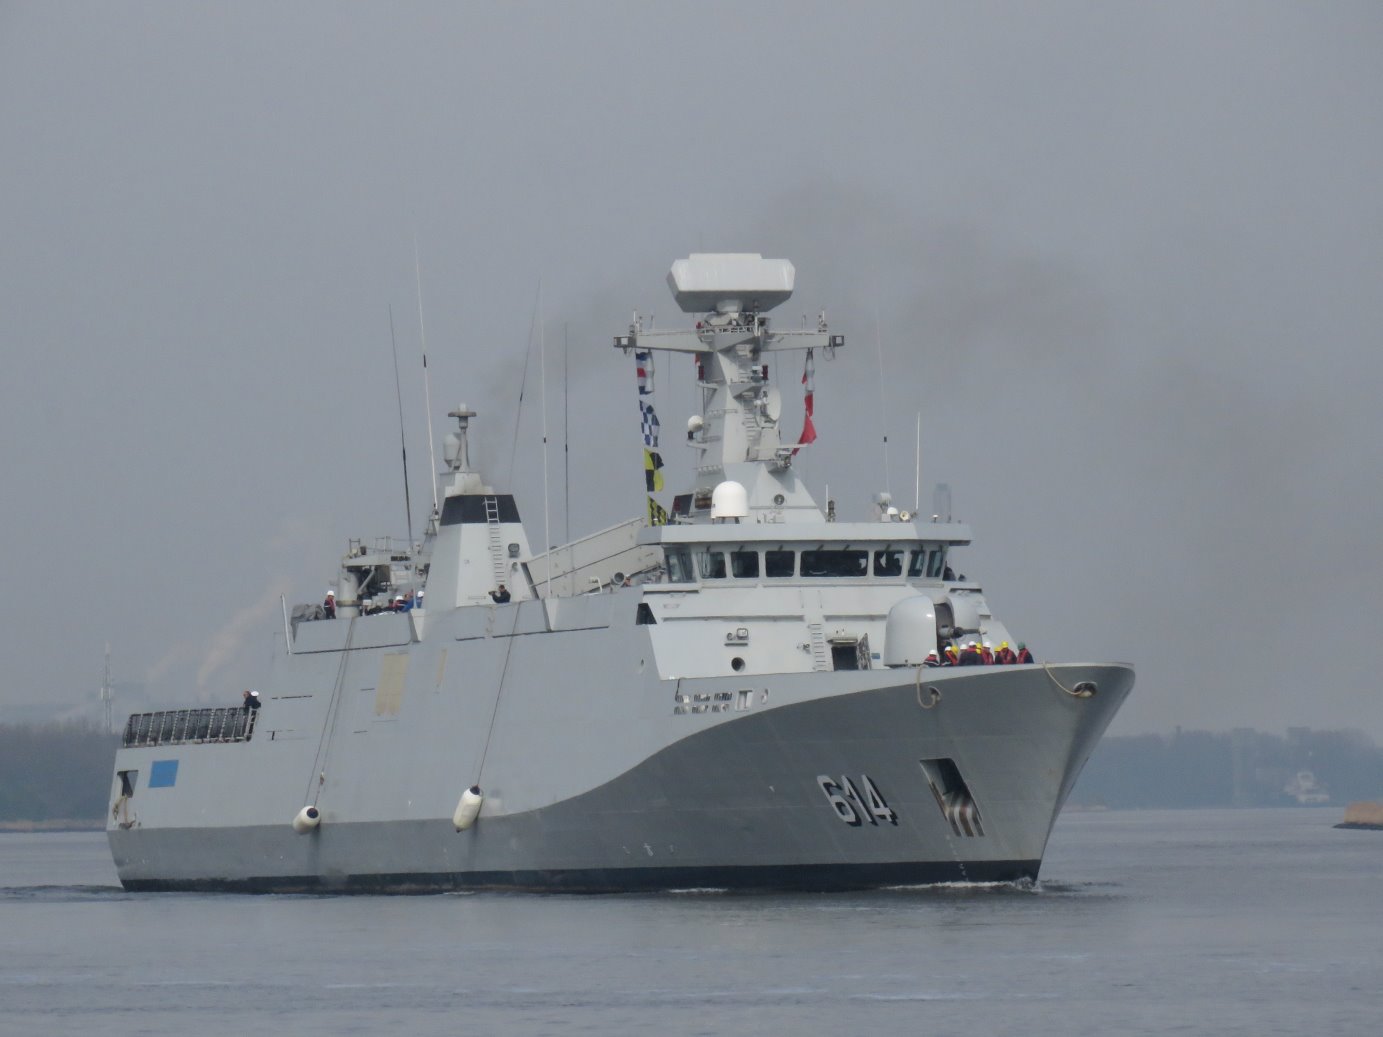 Royal Moroccan Navy Sigma class frigates / Frégates marocaines multimissions Sigma - Page 24 39643455130_9d6fea2b2b_o